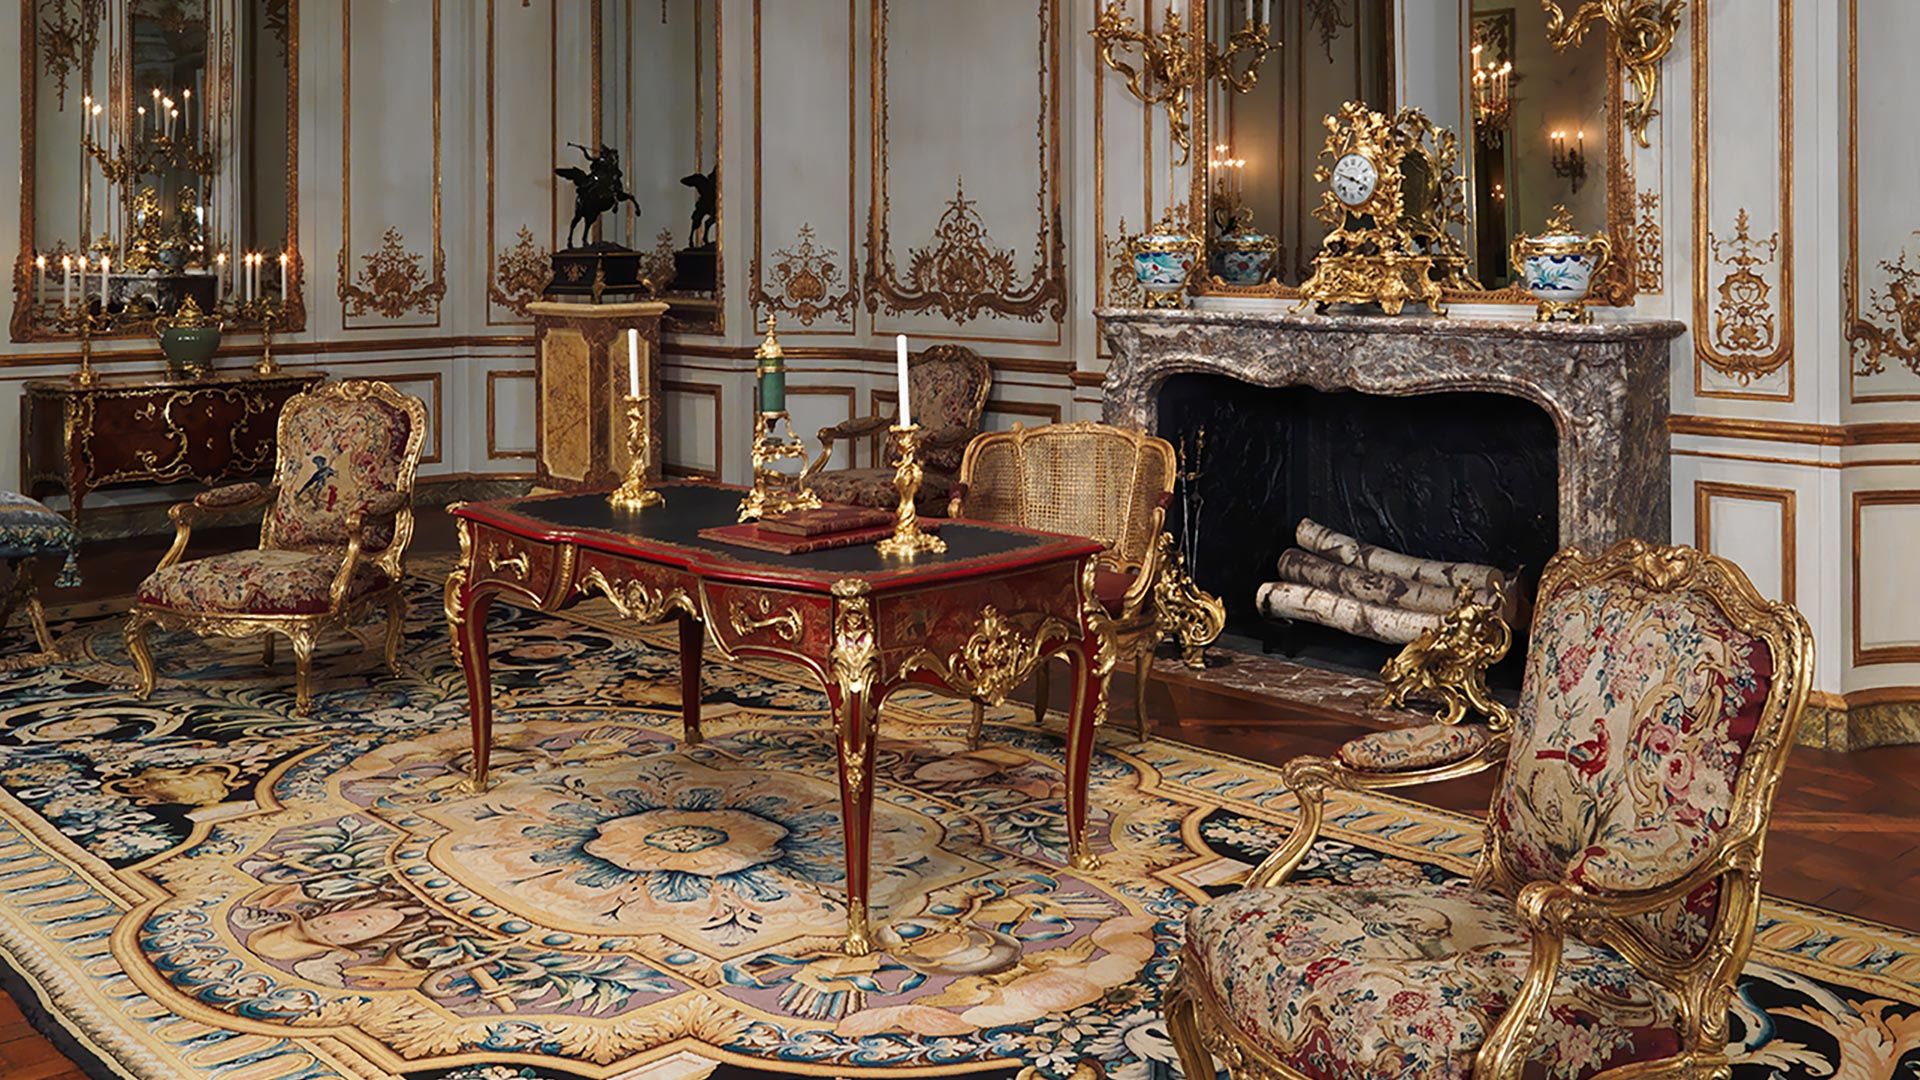 An ornate room with gilded furniture and decorative objects